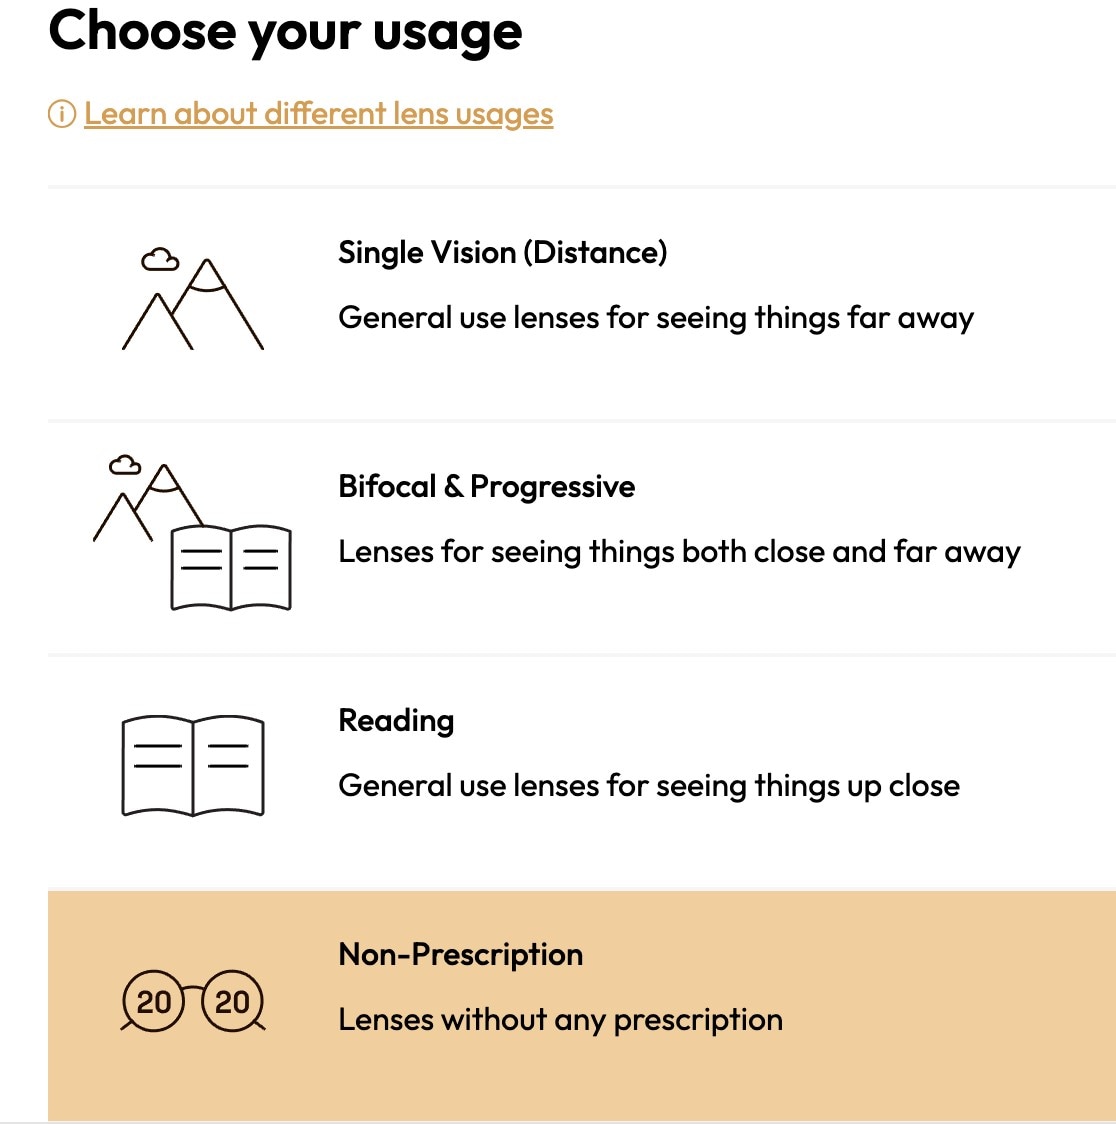 A screenshot showing how to select lens usage on the Eyebuydirect website